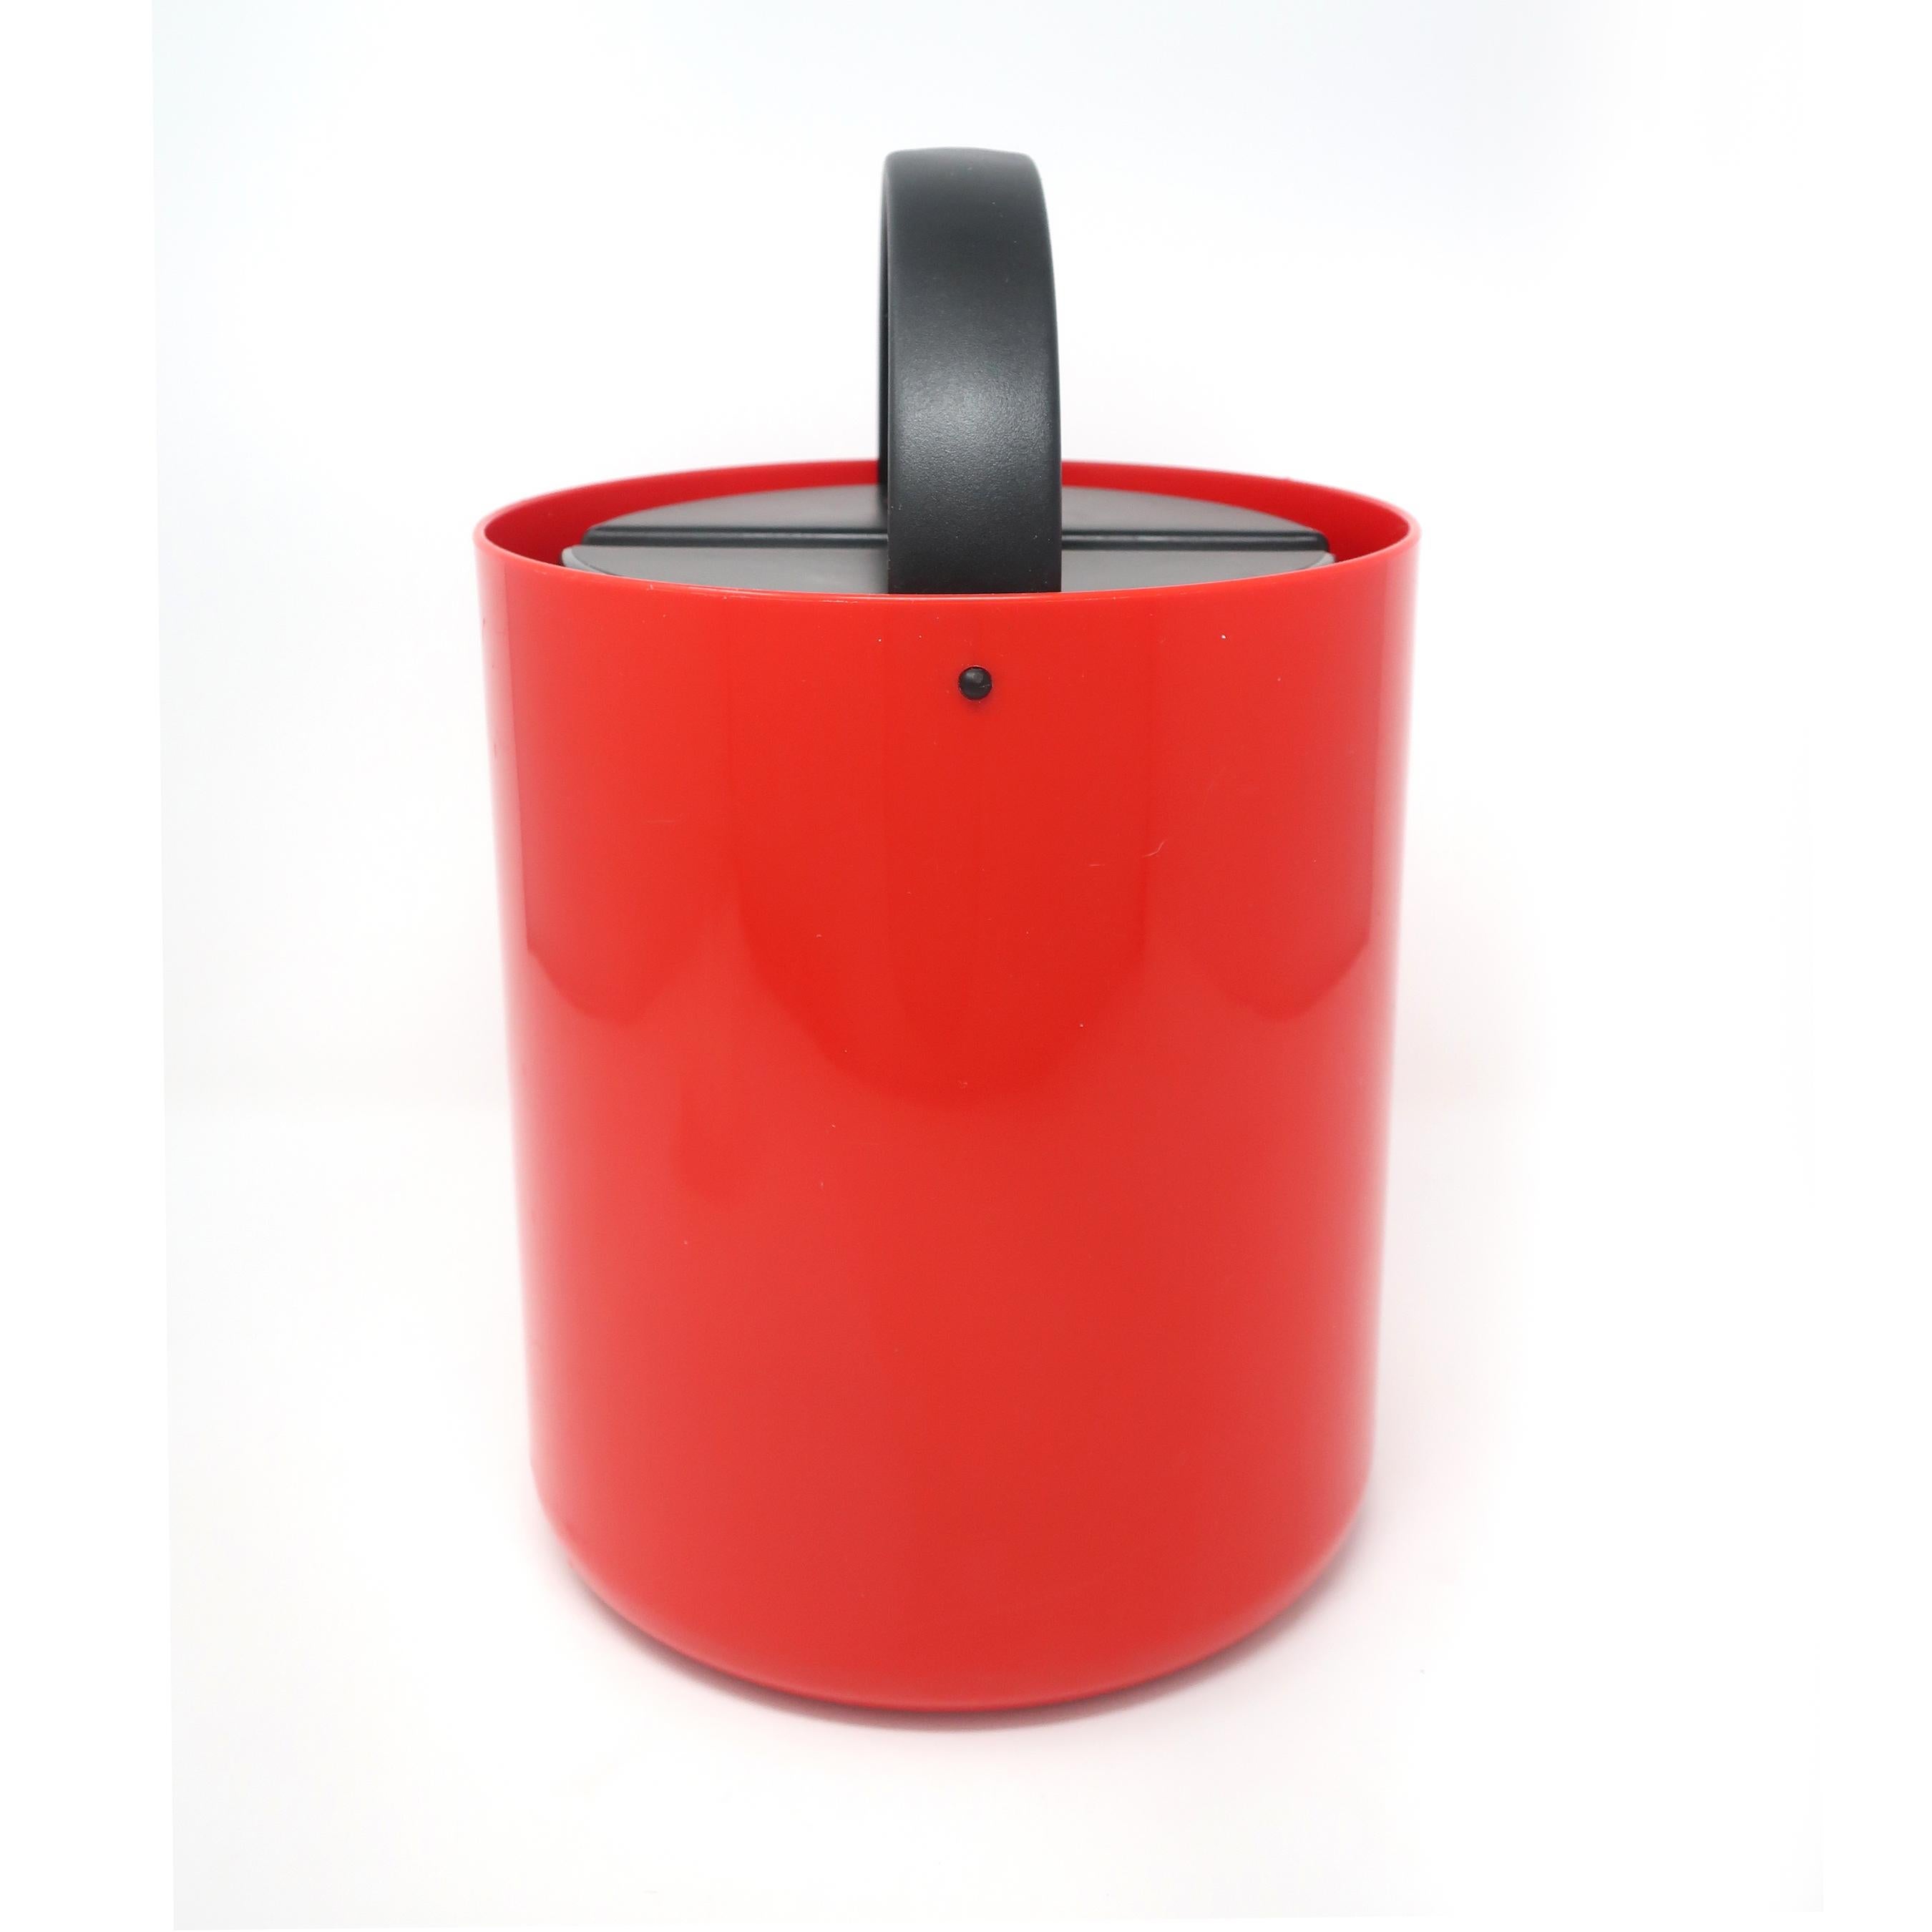 A vintage red and black ice bucket from the 1980s with a set of four black plastic drink stirrers designed by Carsten Jorgensen for Bodum. Red bucket with black liner, black lid, and black handle that stows away alongside the lid.

In very good